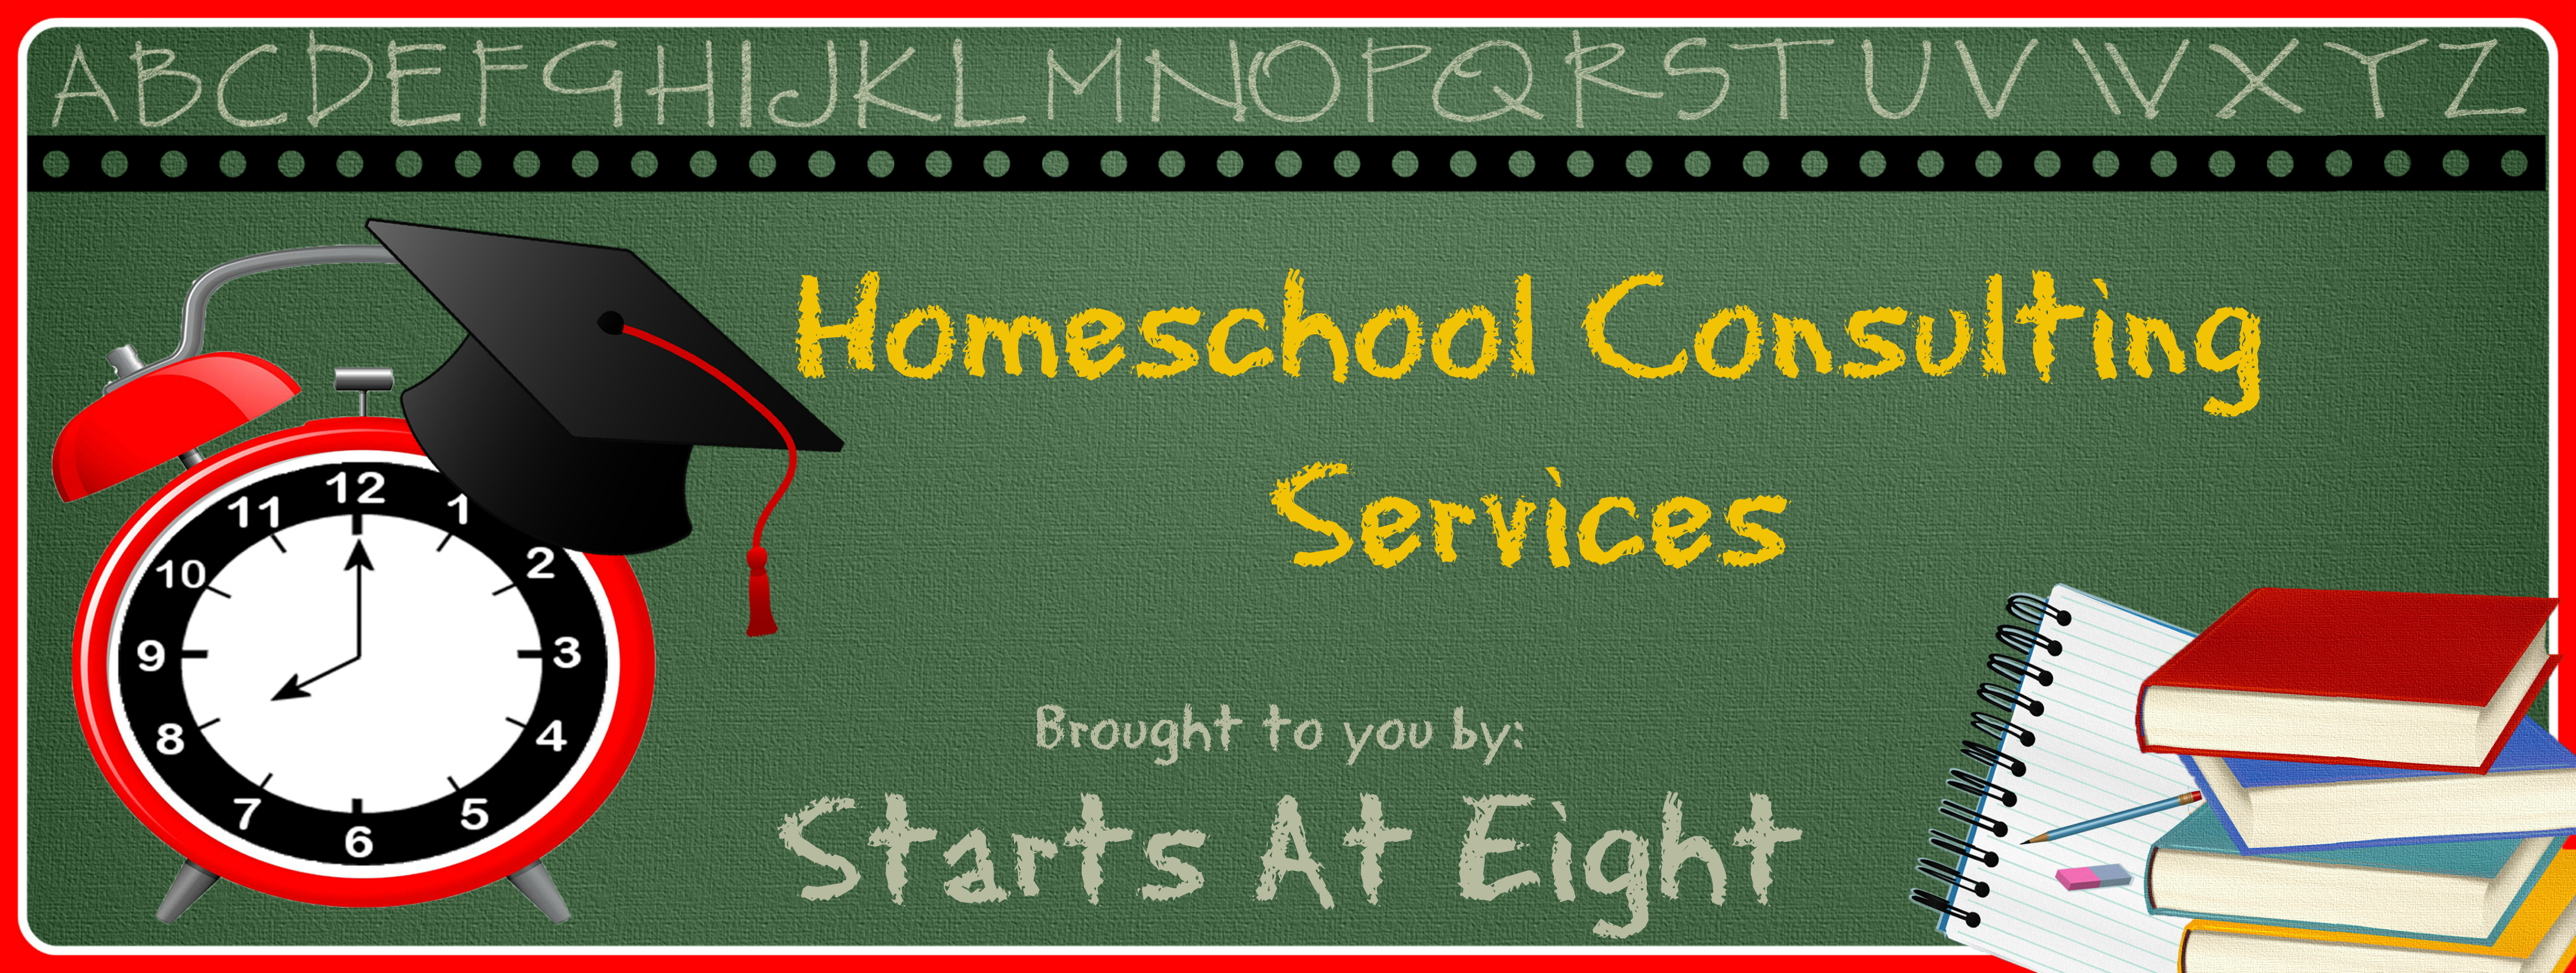 Homeschool Consulting Services from Starts At Eight